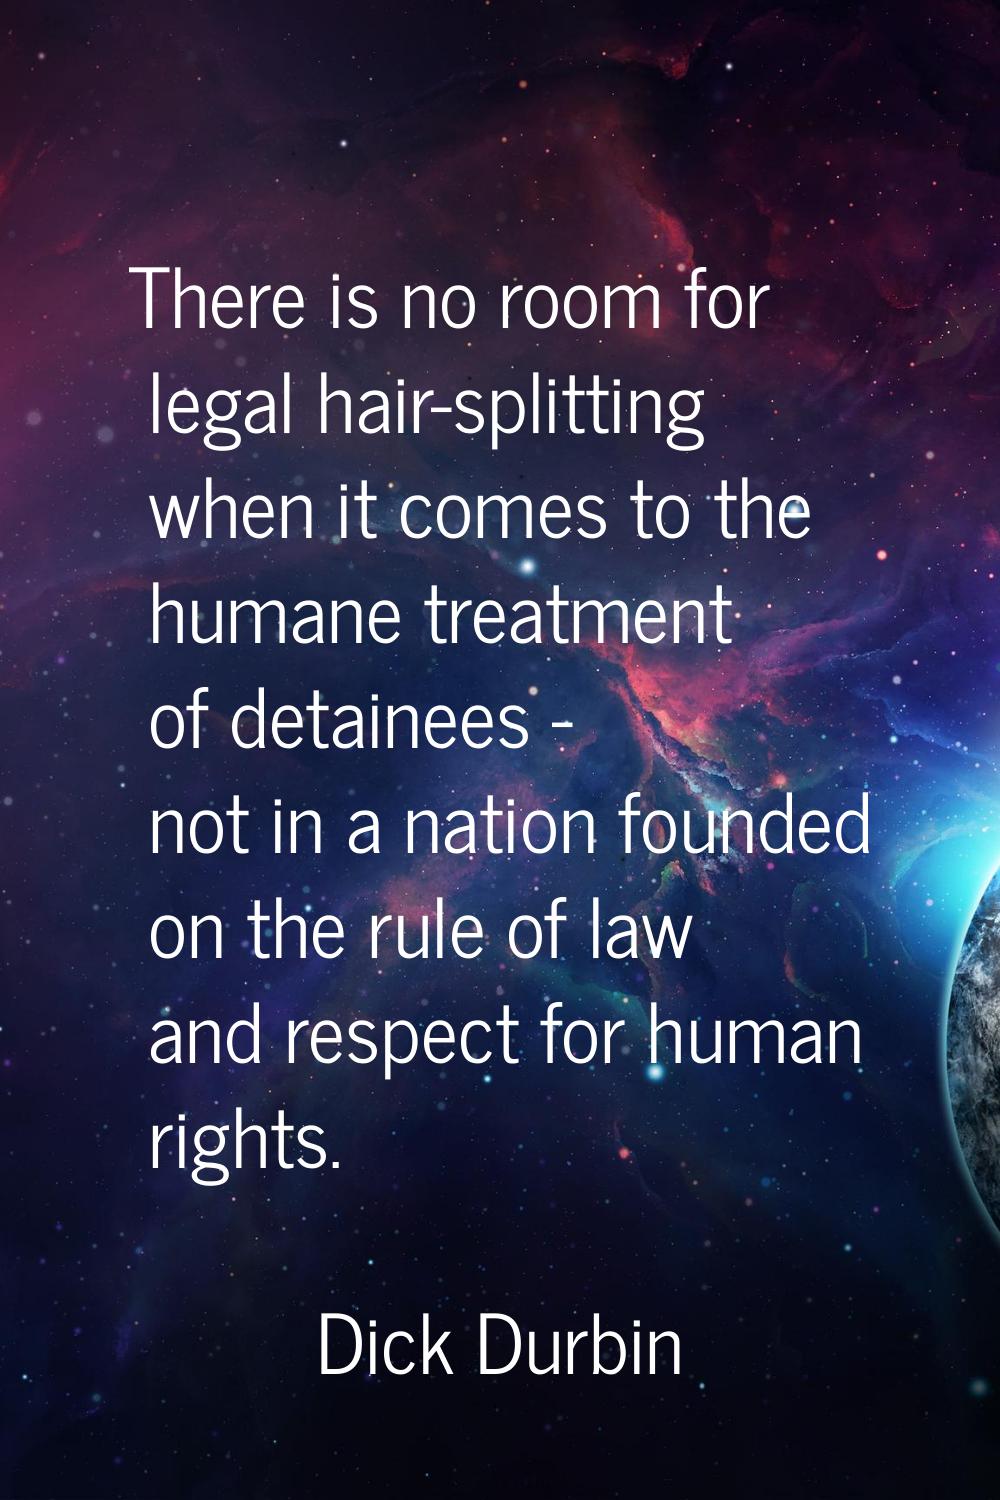 There is no room for legal hair-splitting when it comes to the humane treatment of detainees - not 